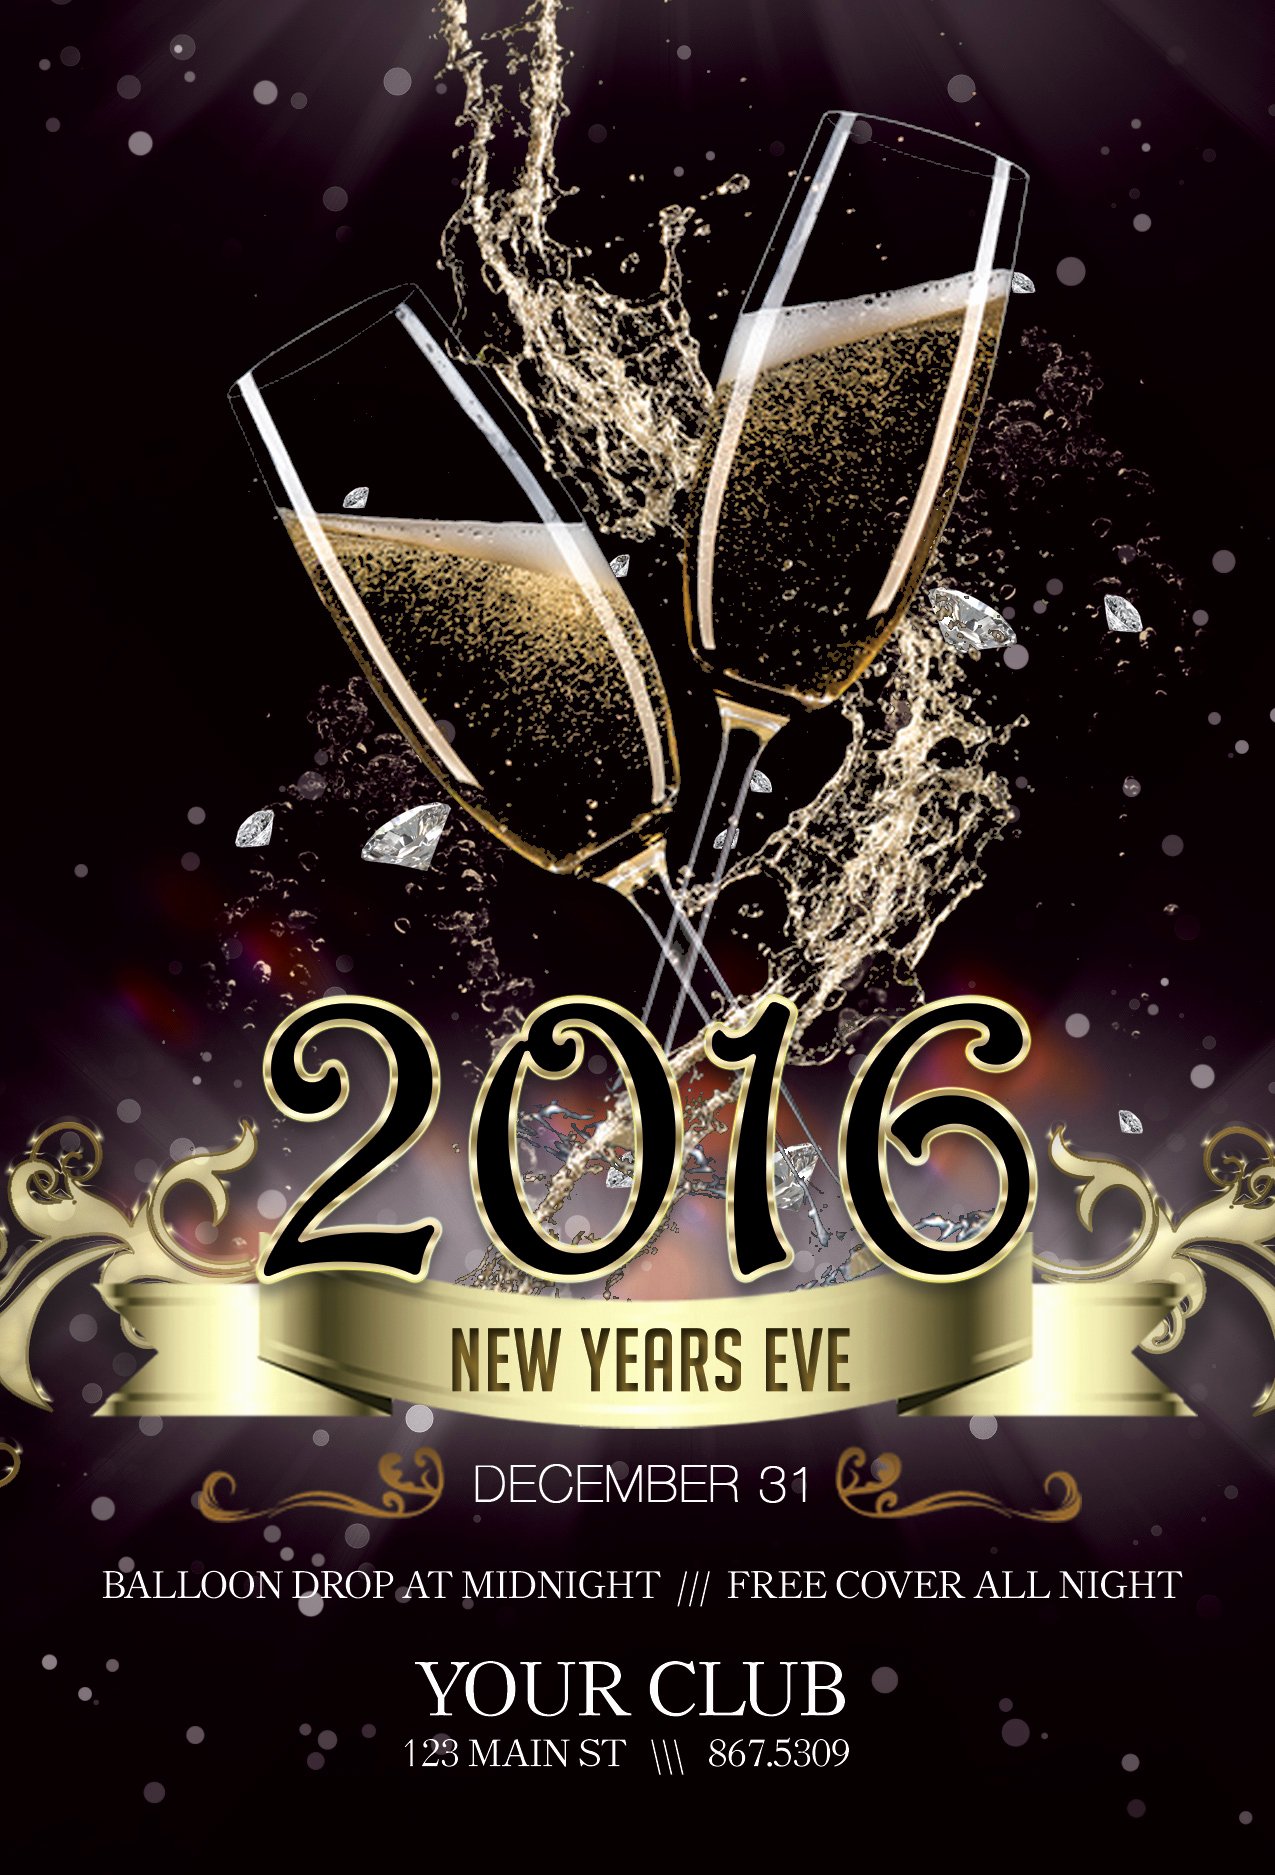 New Year Flyers Template Luxury Free New Years Eve Flyer Template Portablegasgrillweber